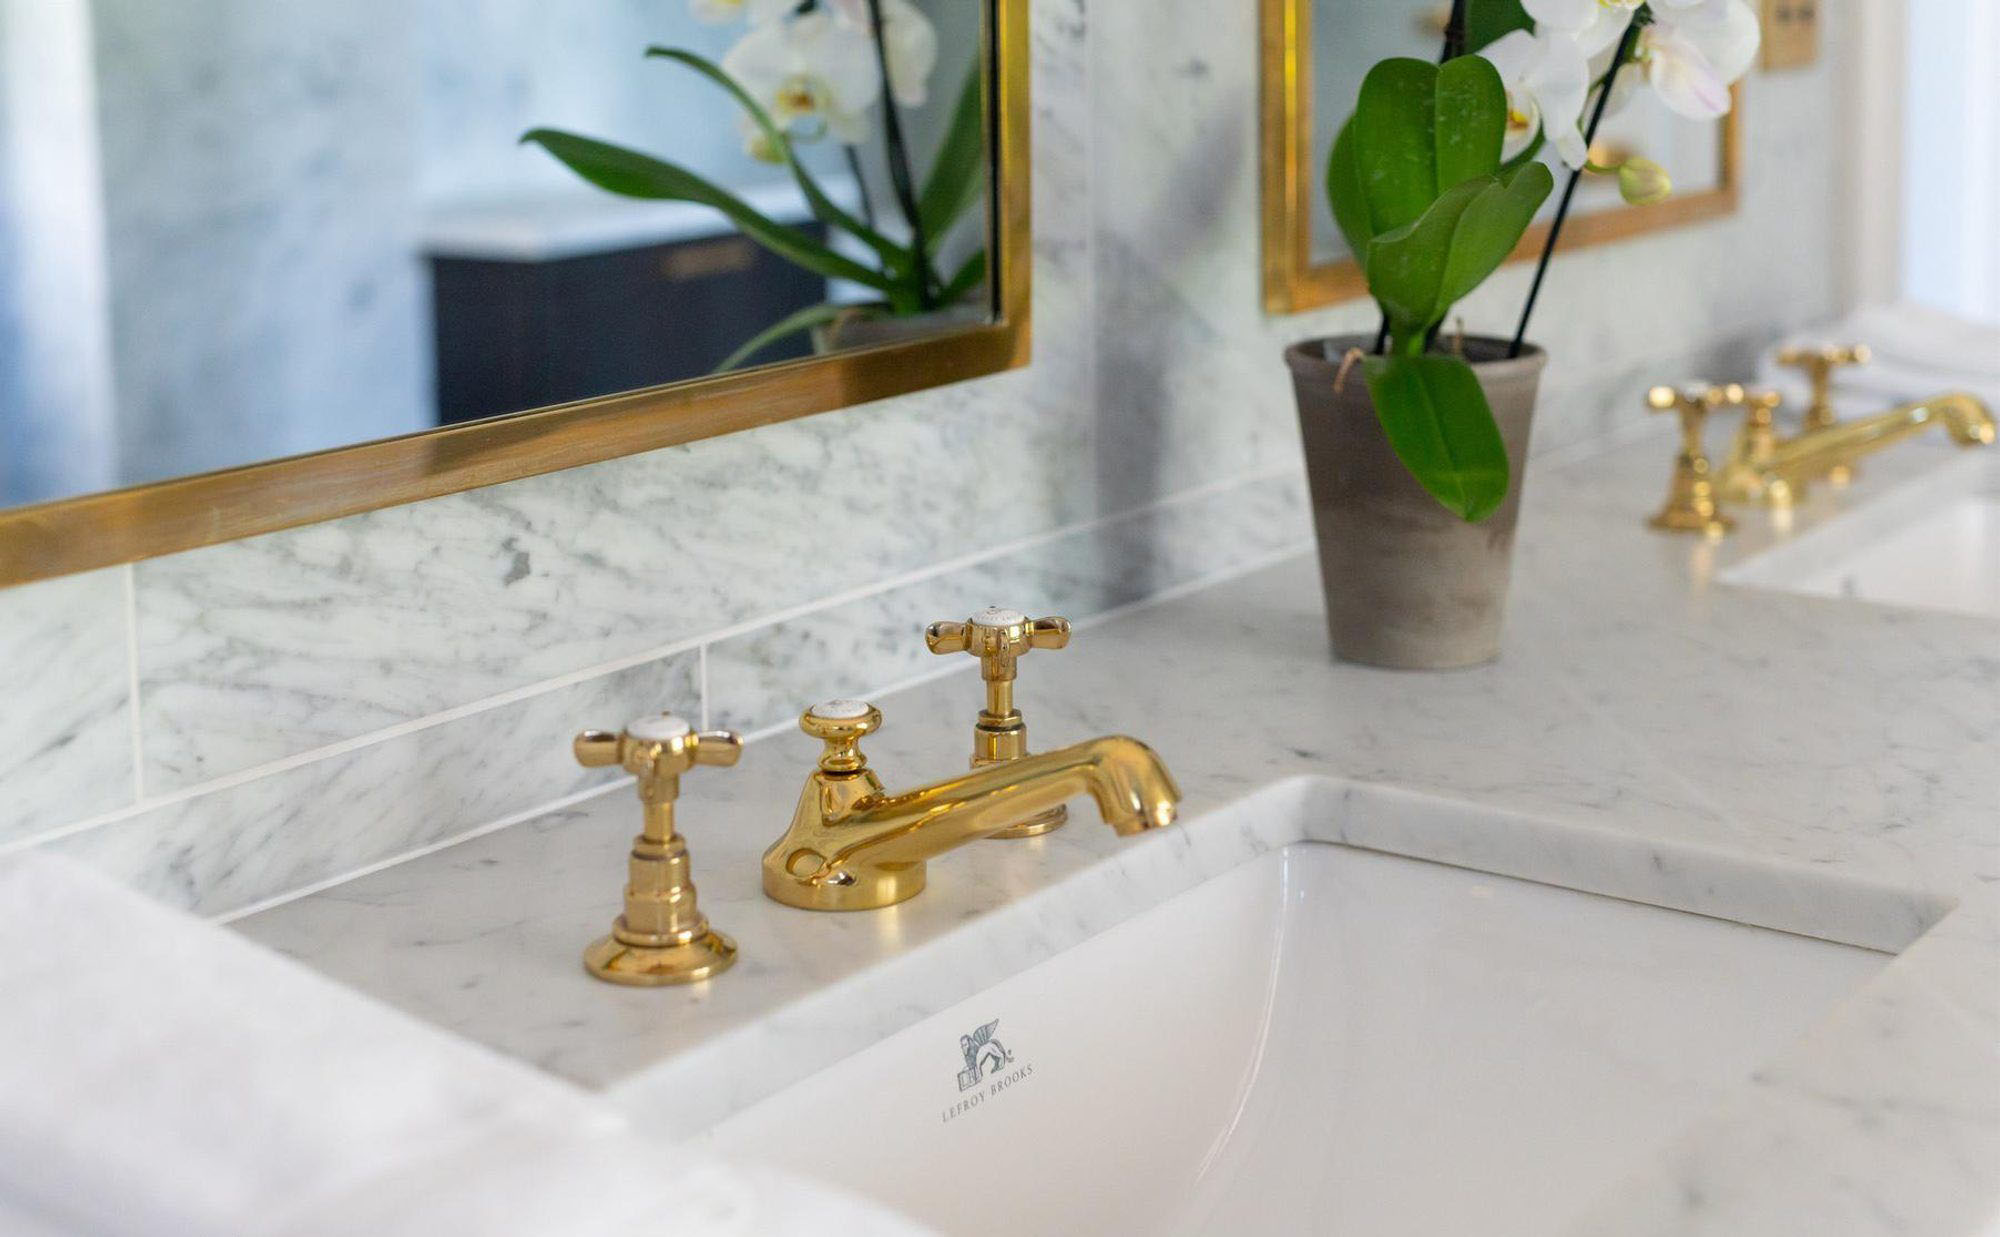 Closeup of a gold bathroom sink faucet with marble countertop.